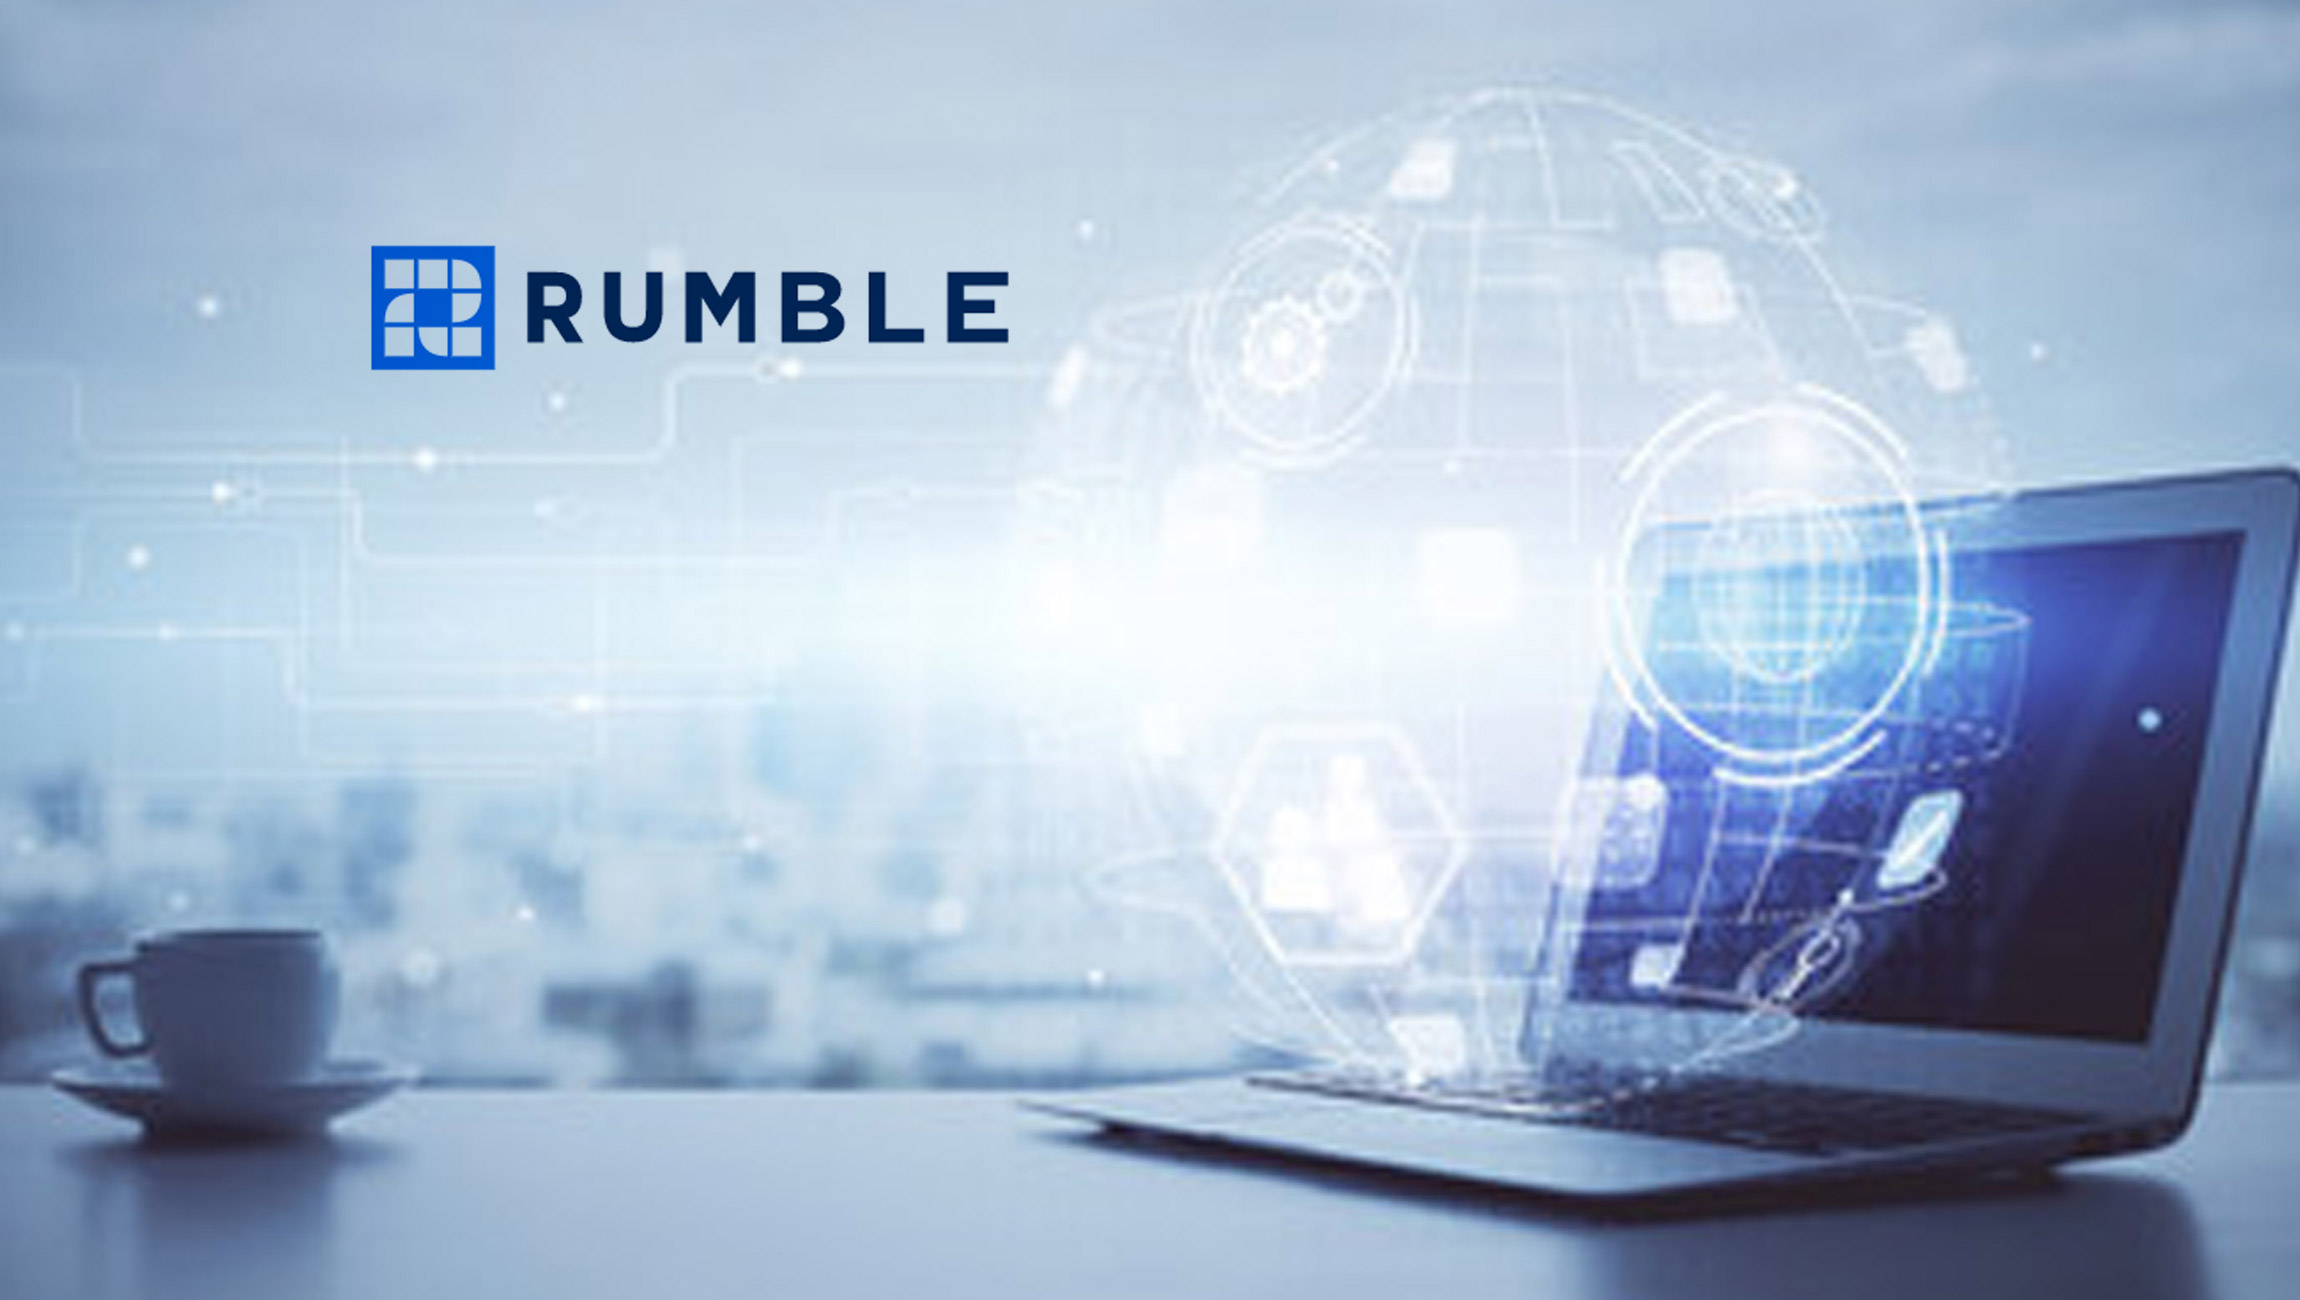 Network Discovery and Asset Inventory Leader Rumble Announces $15M Series A Led by Decibel Partners